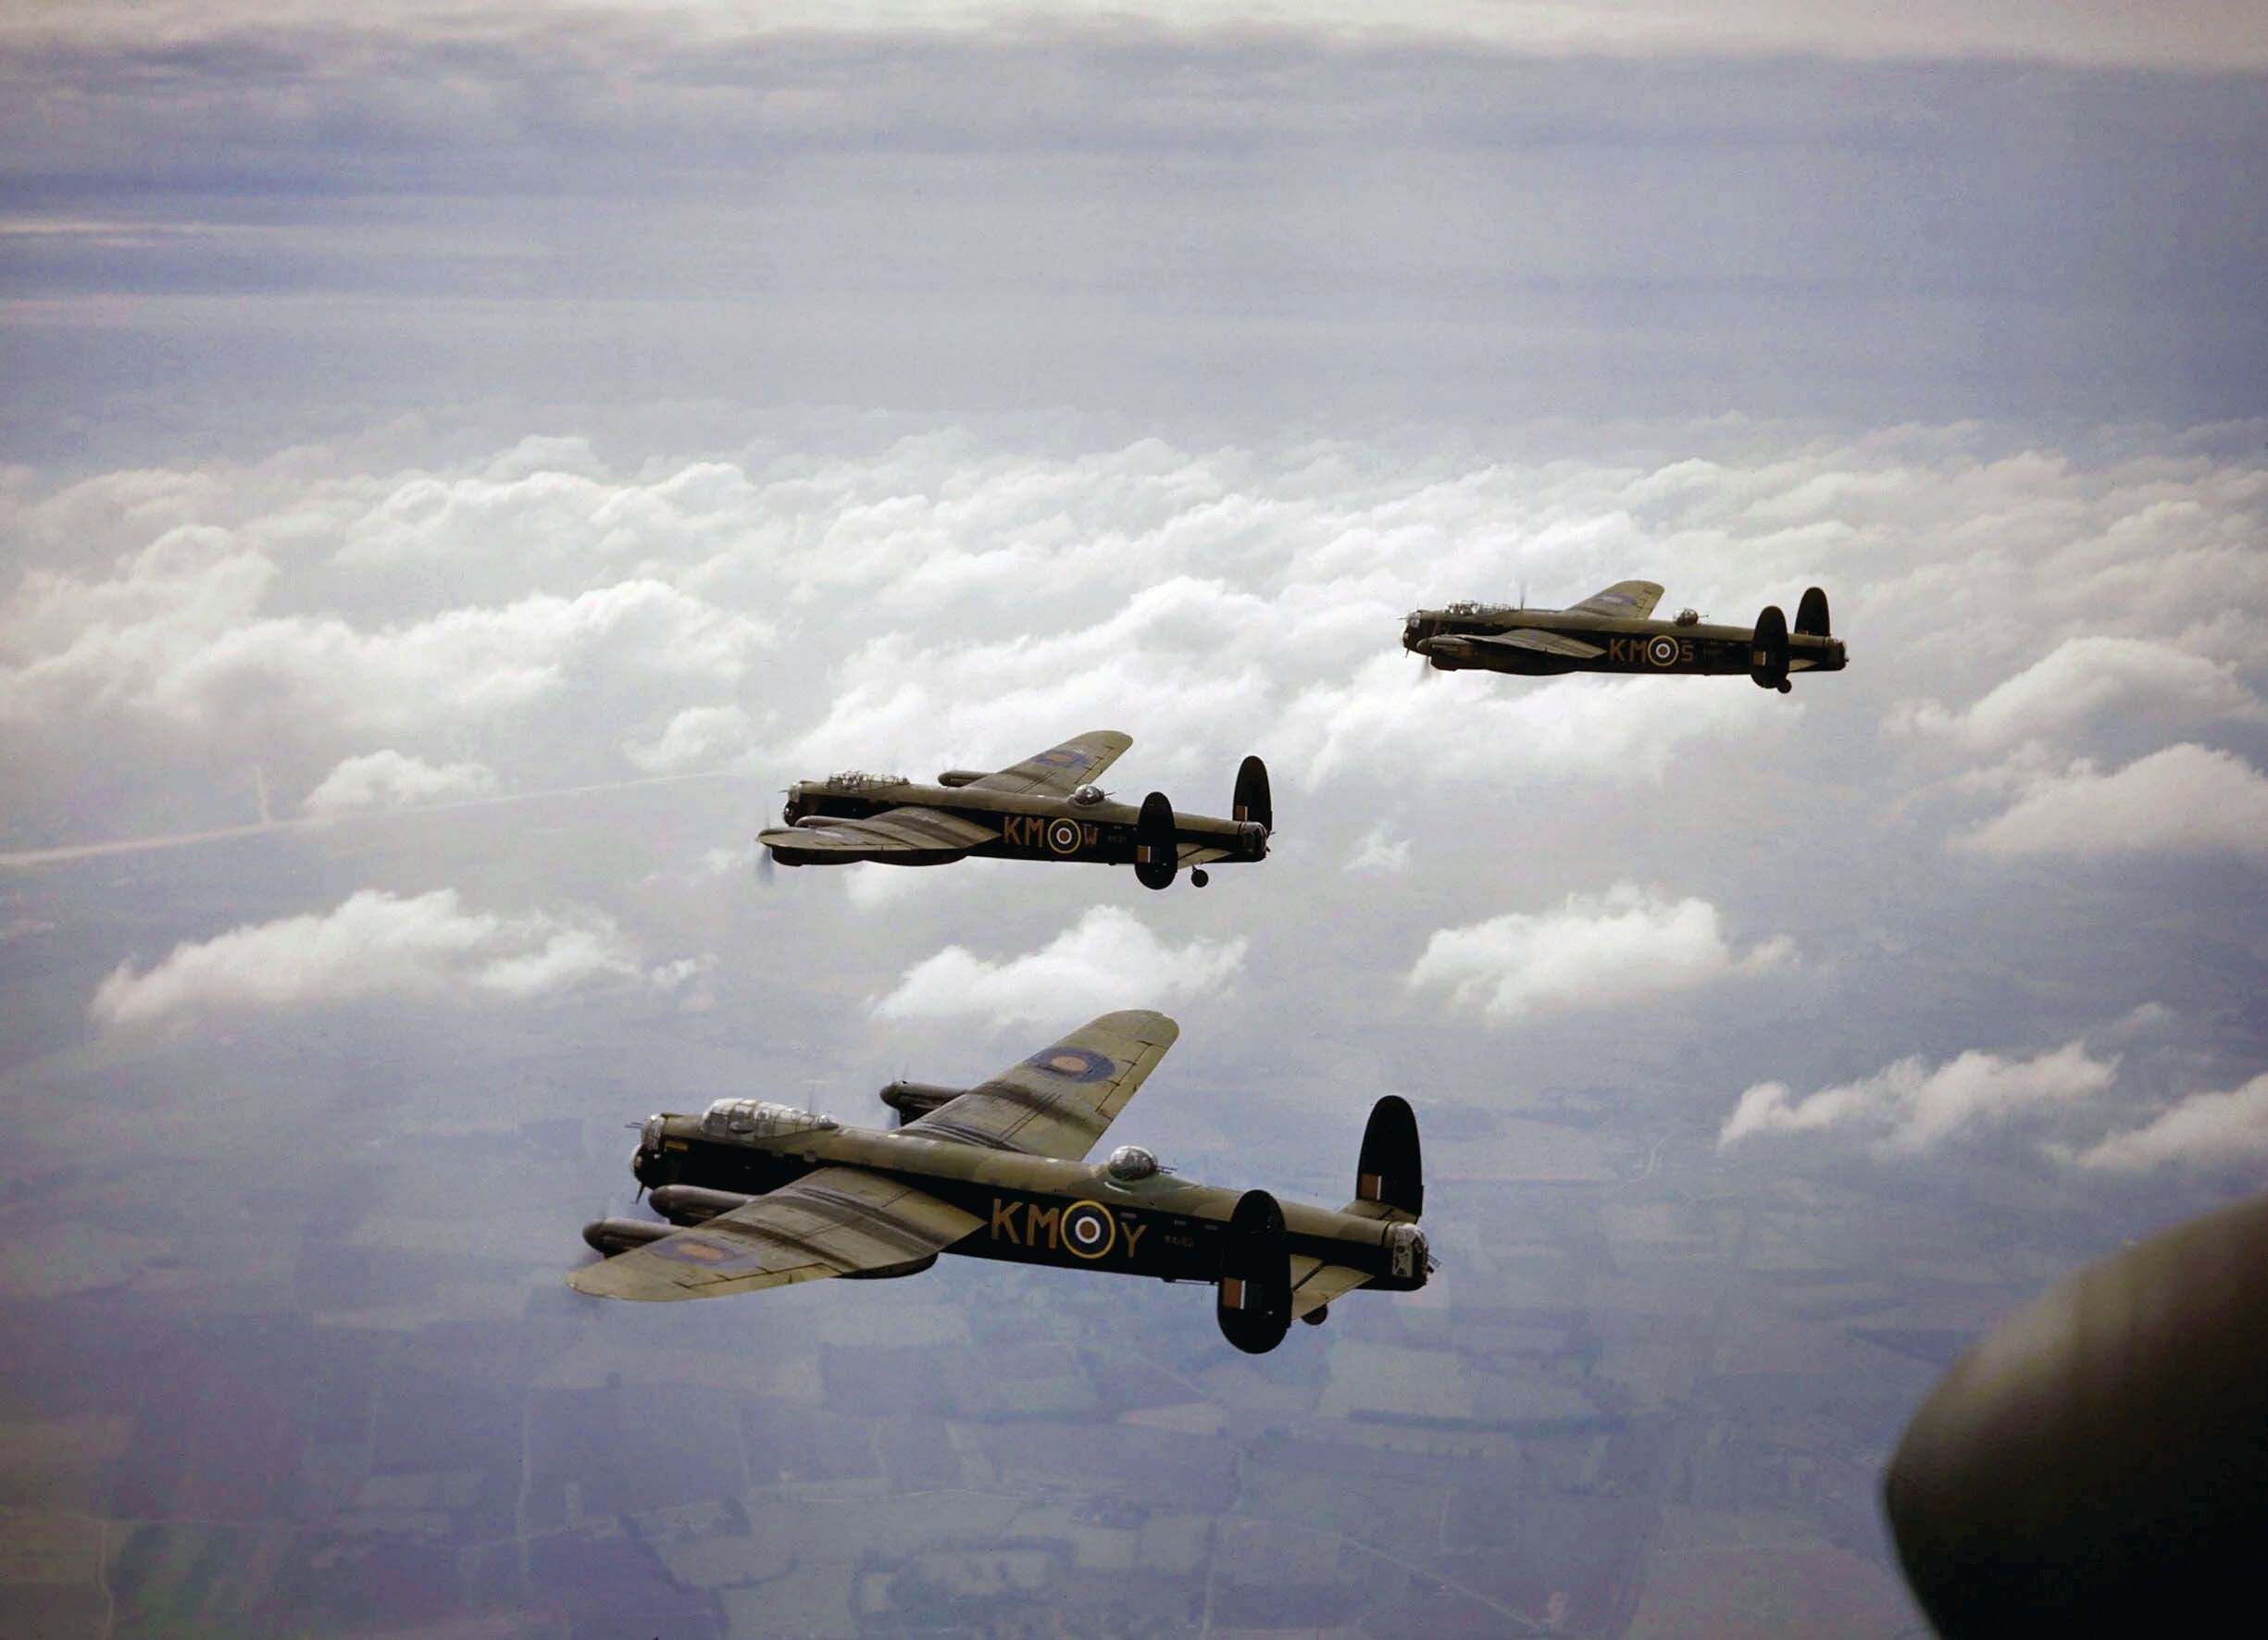 A trio of Avro Lancaster heavy bombers of No. 44 Squadron RAF fly toward a city in Germany during a raid in September 1942. To many observers, the Lancaster was the finest Allied bomber of World War II in Europe.